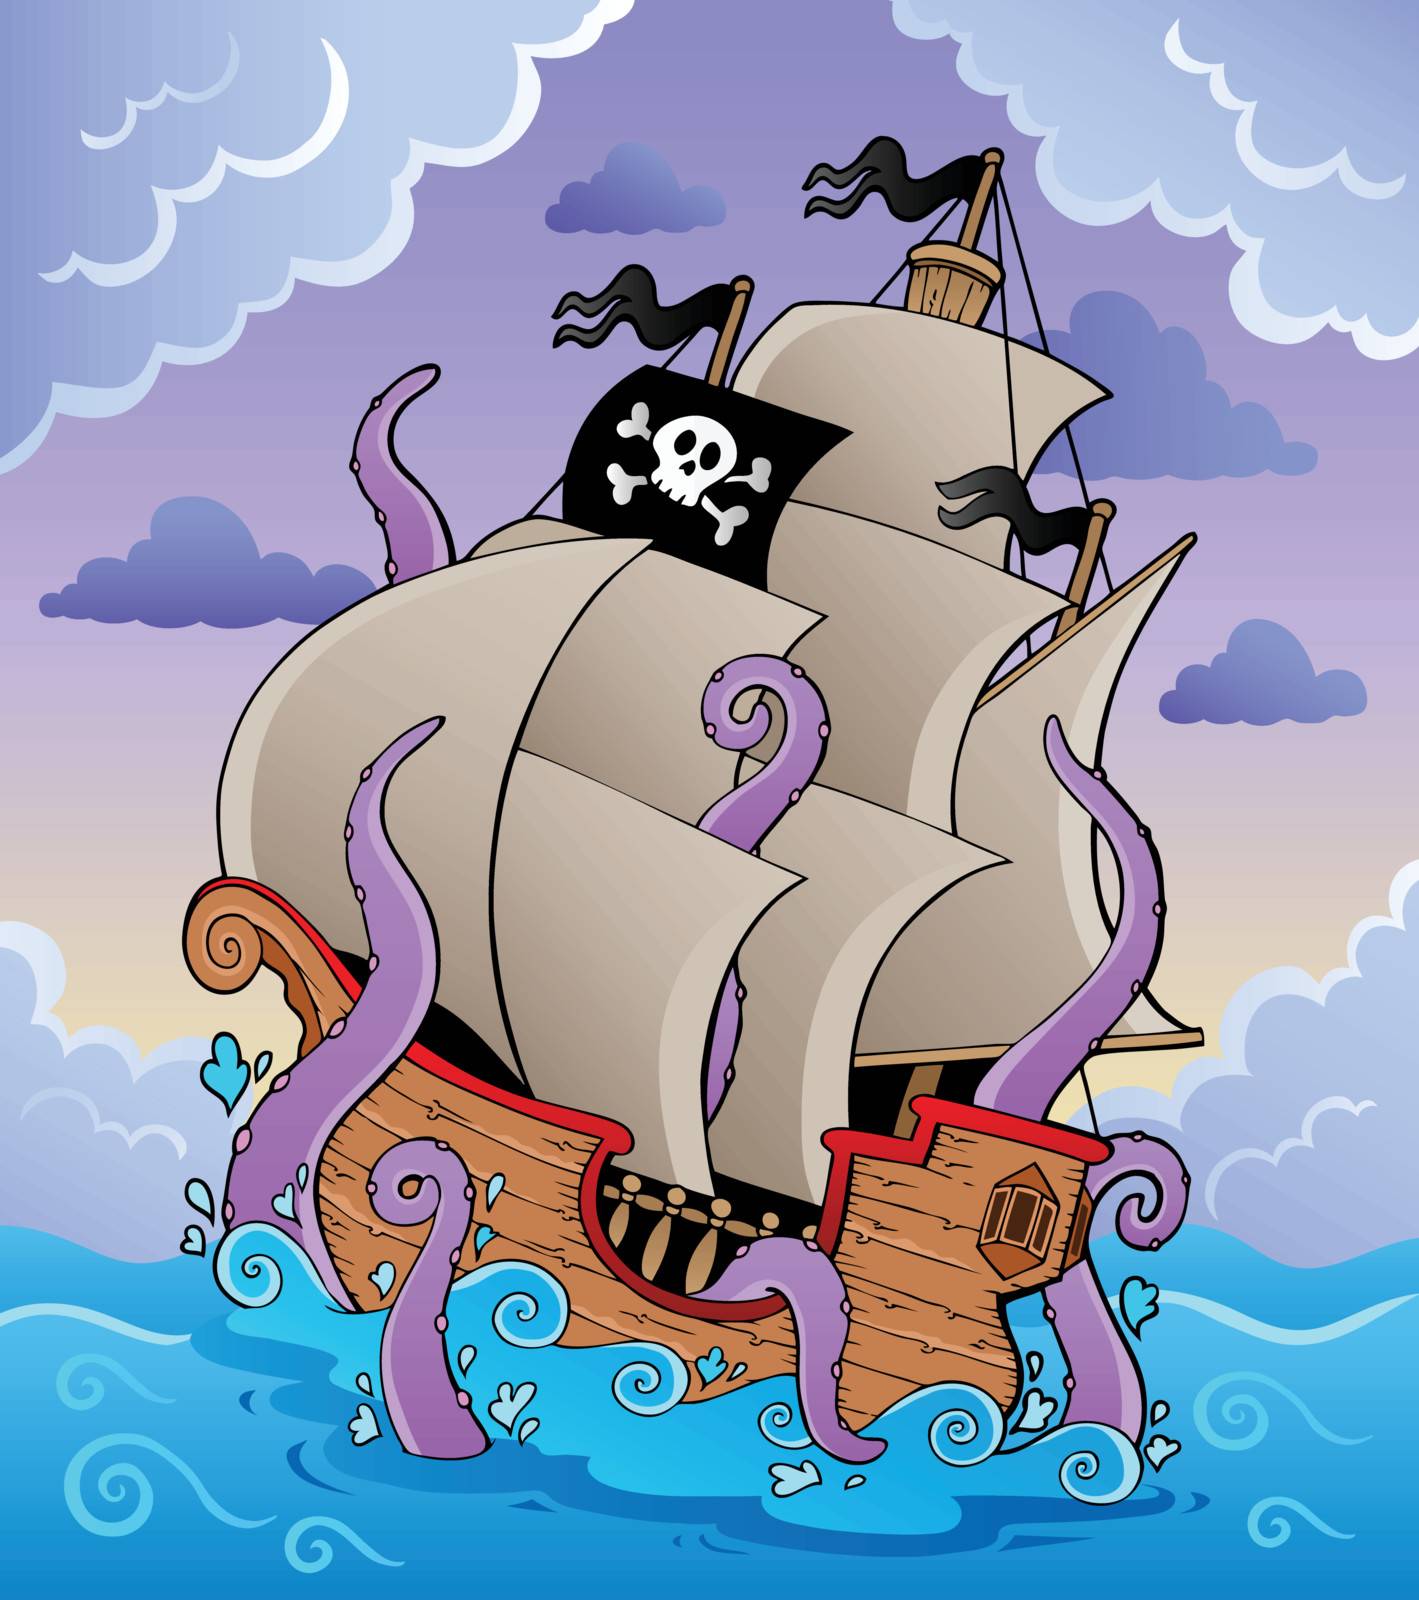 Pirate ship with tentacles in storm - vector illustration.